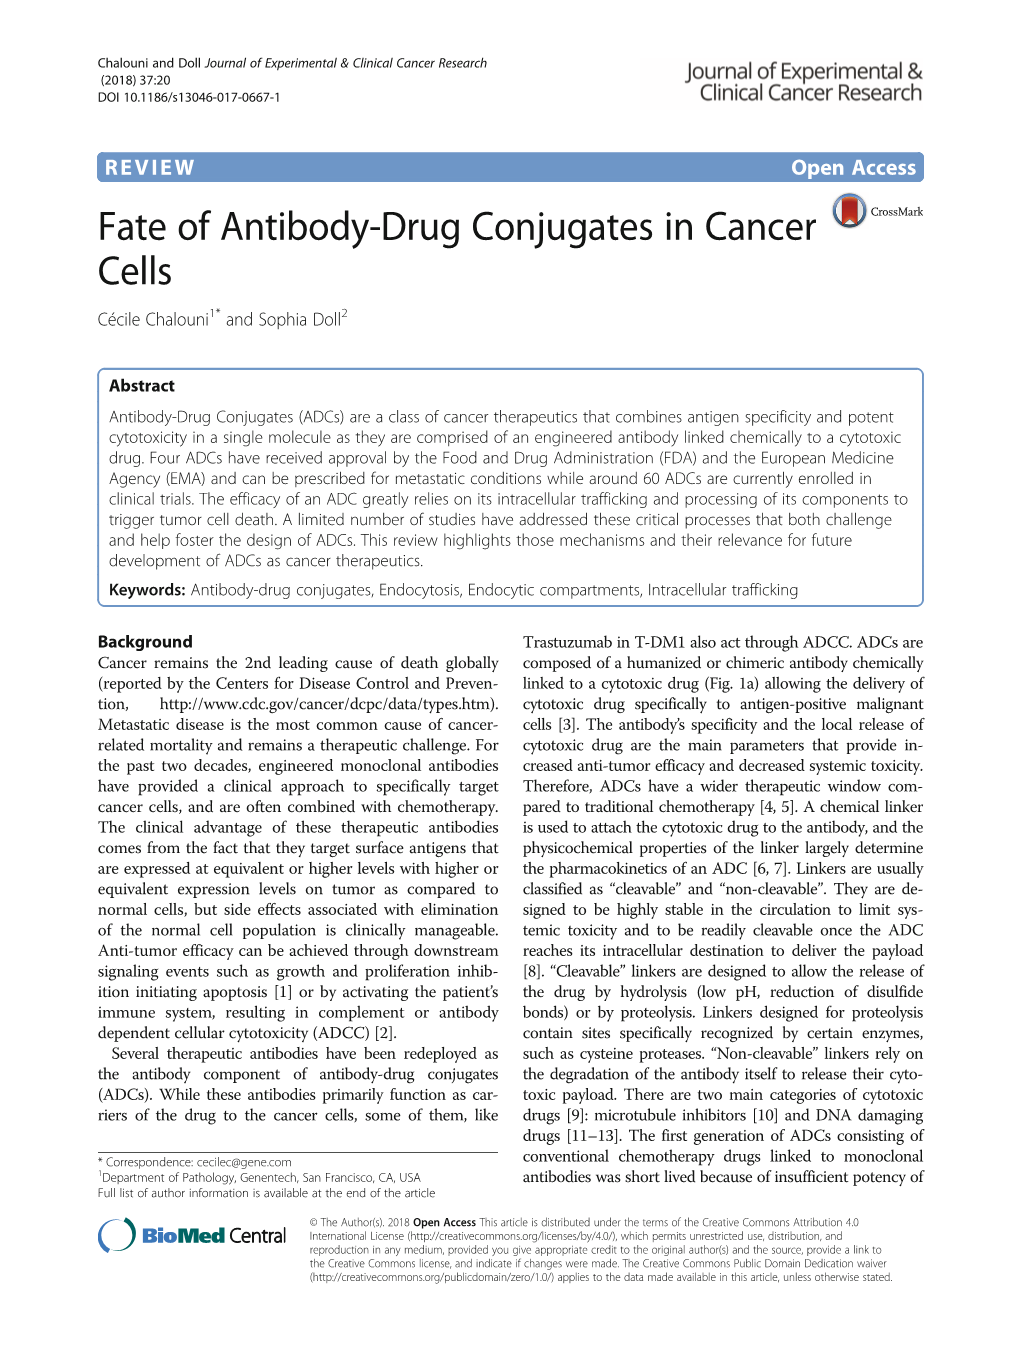 Fate of Antibody-Drug Conjugates in Cancer Cells Cécile Chalouni1* and Sophia Doll2